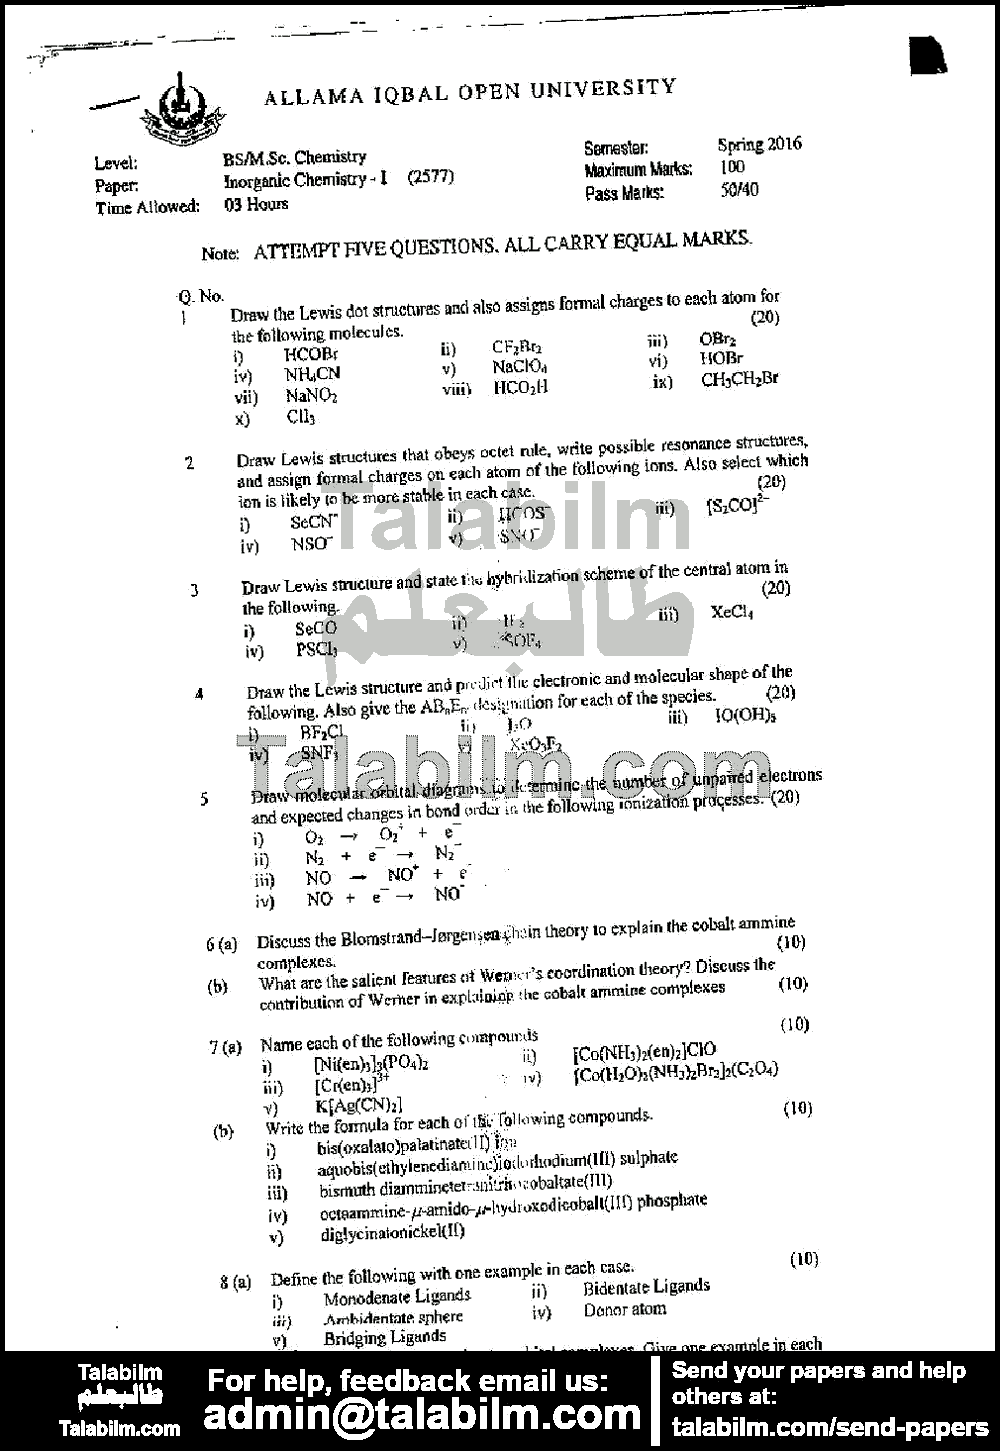 Inorganic Chemistry-I 2577 past paper for Spring 2016